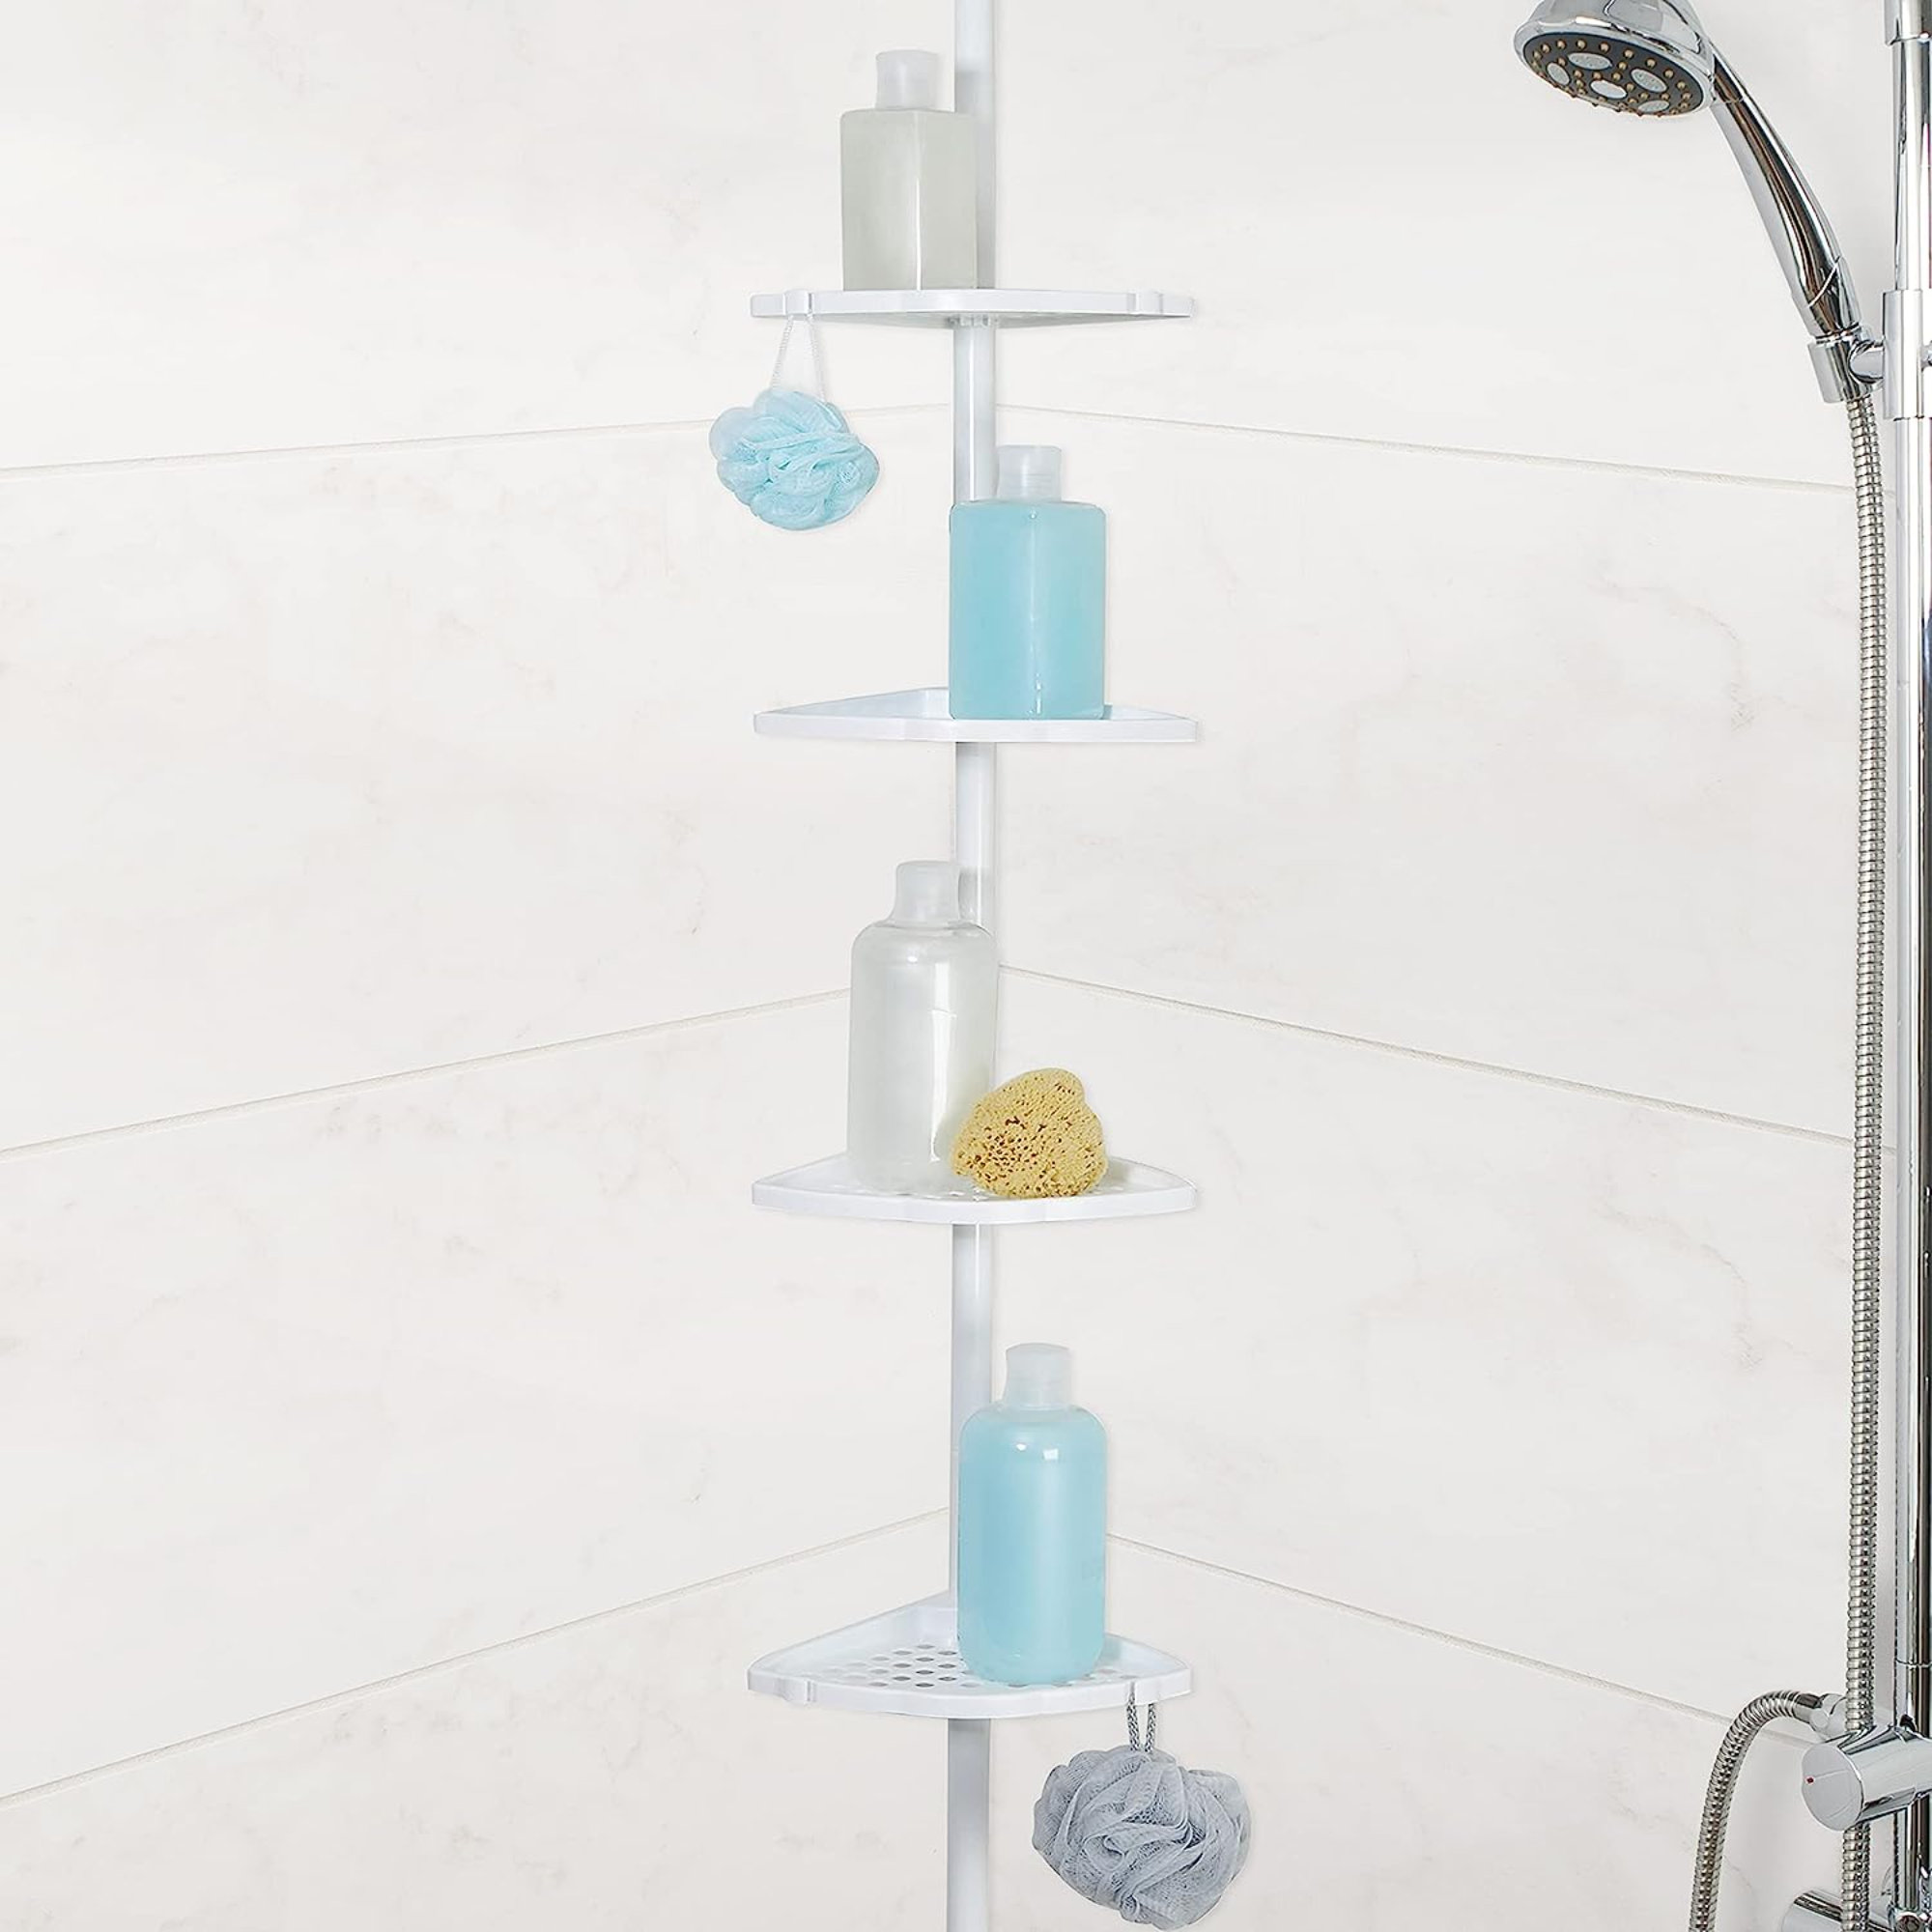 Rebrilliant Stainless Steel Shower Caddy